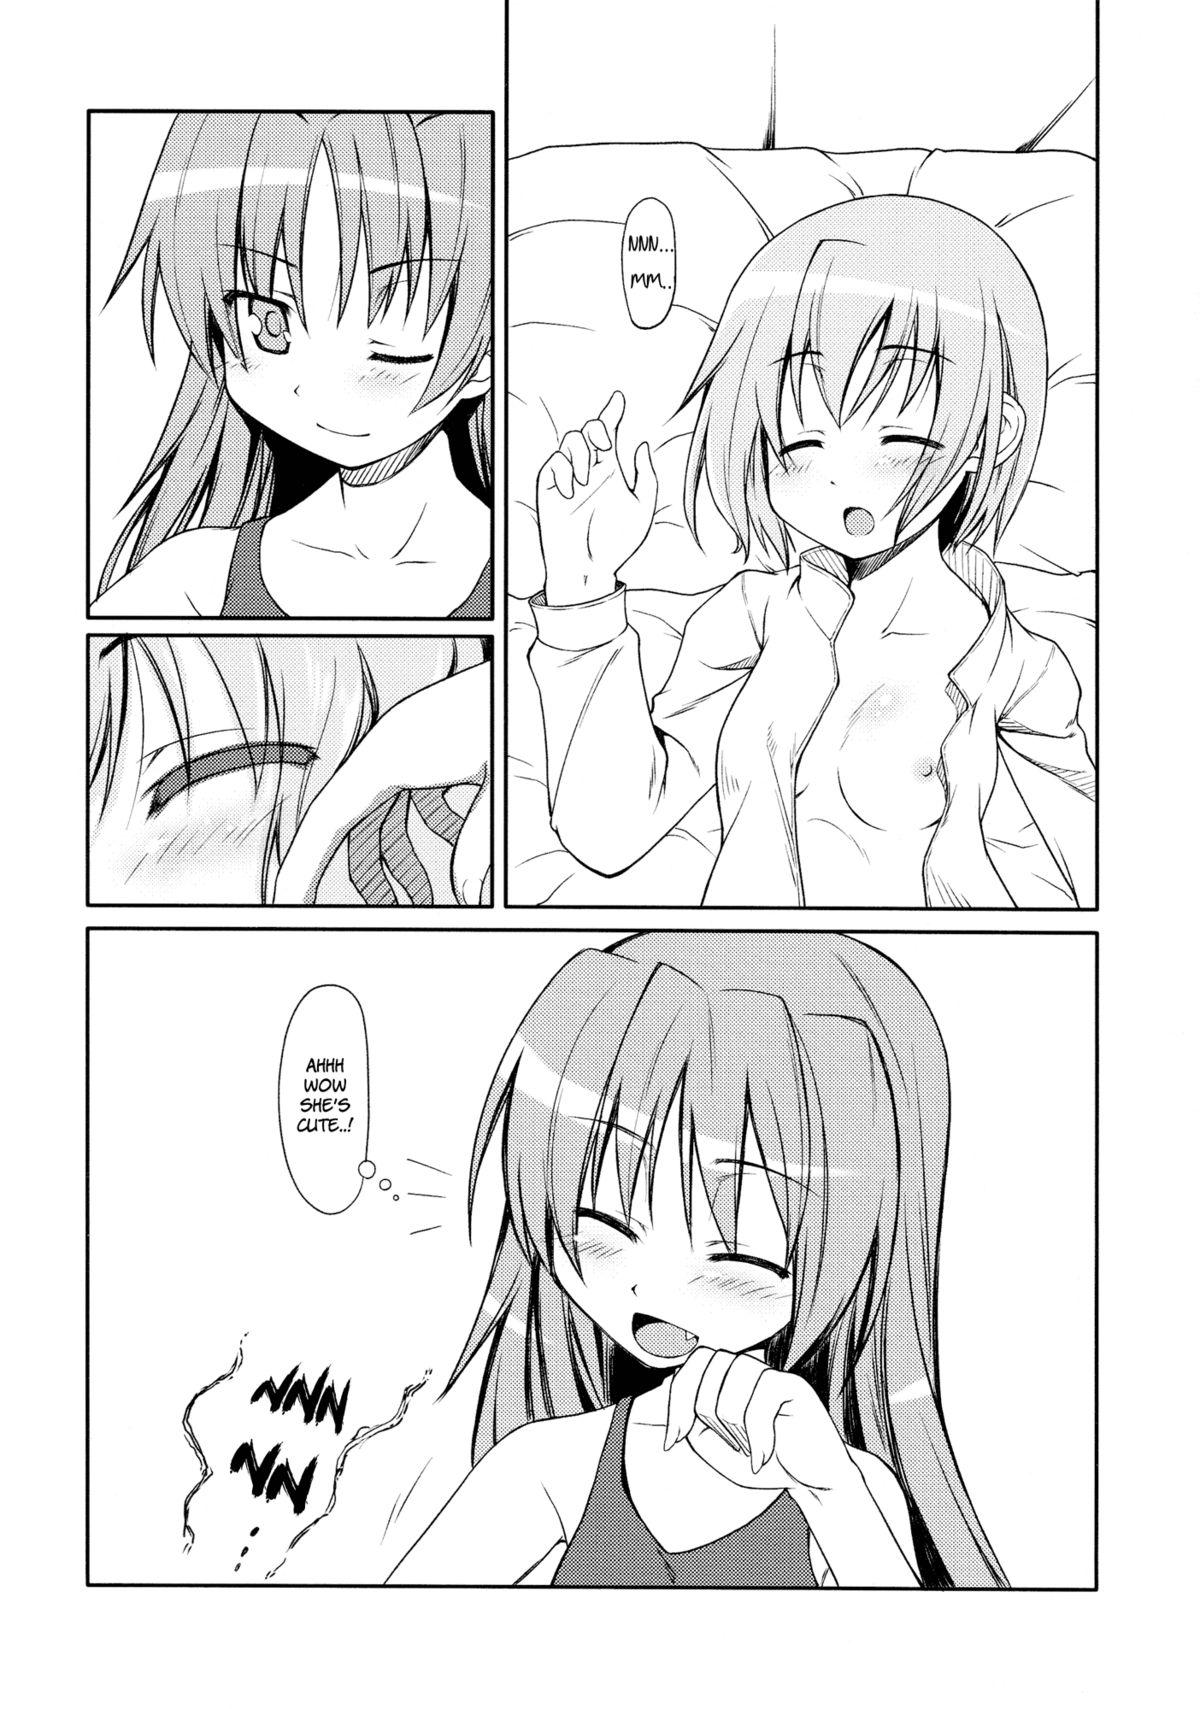 All Girls fall in love through her ears - Puella magi madoka magica Panty - Page 9